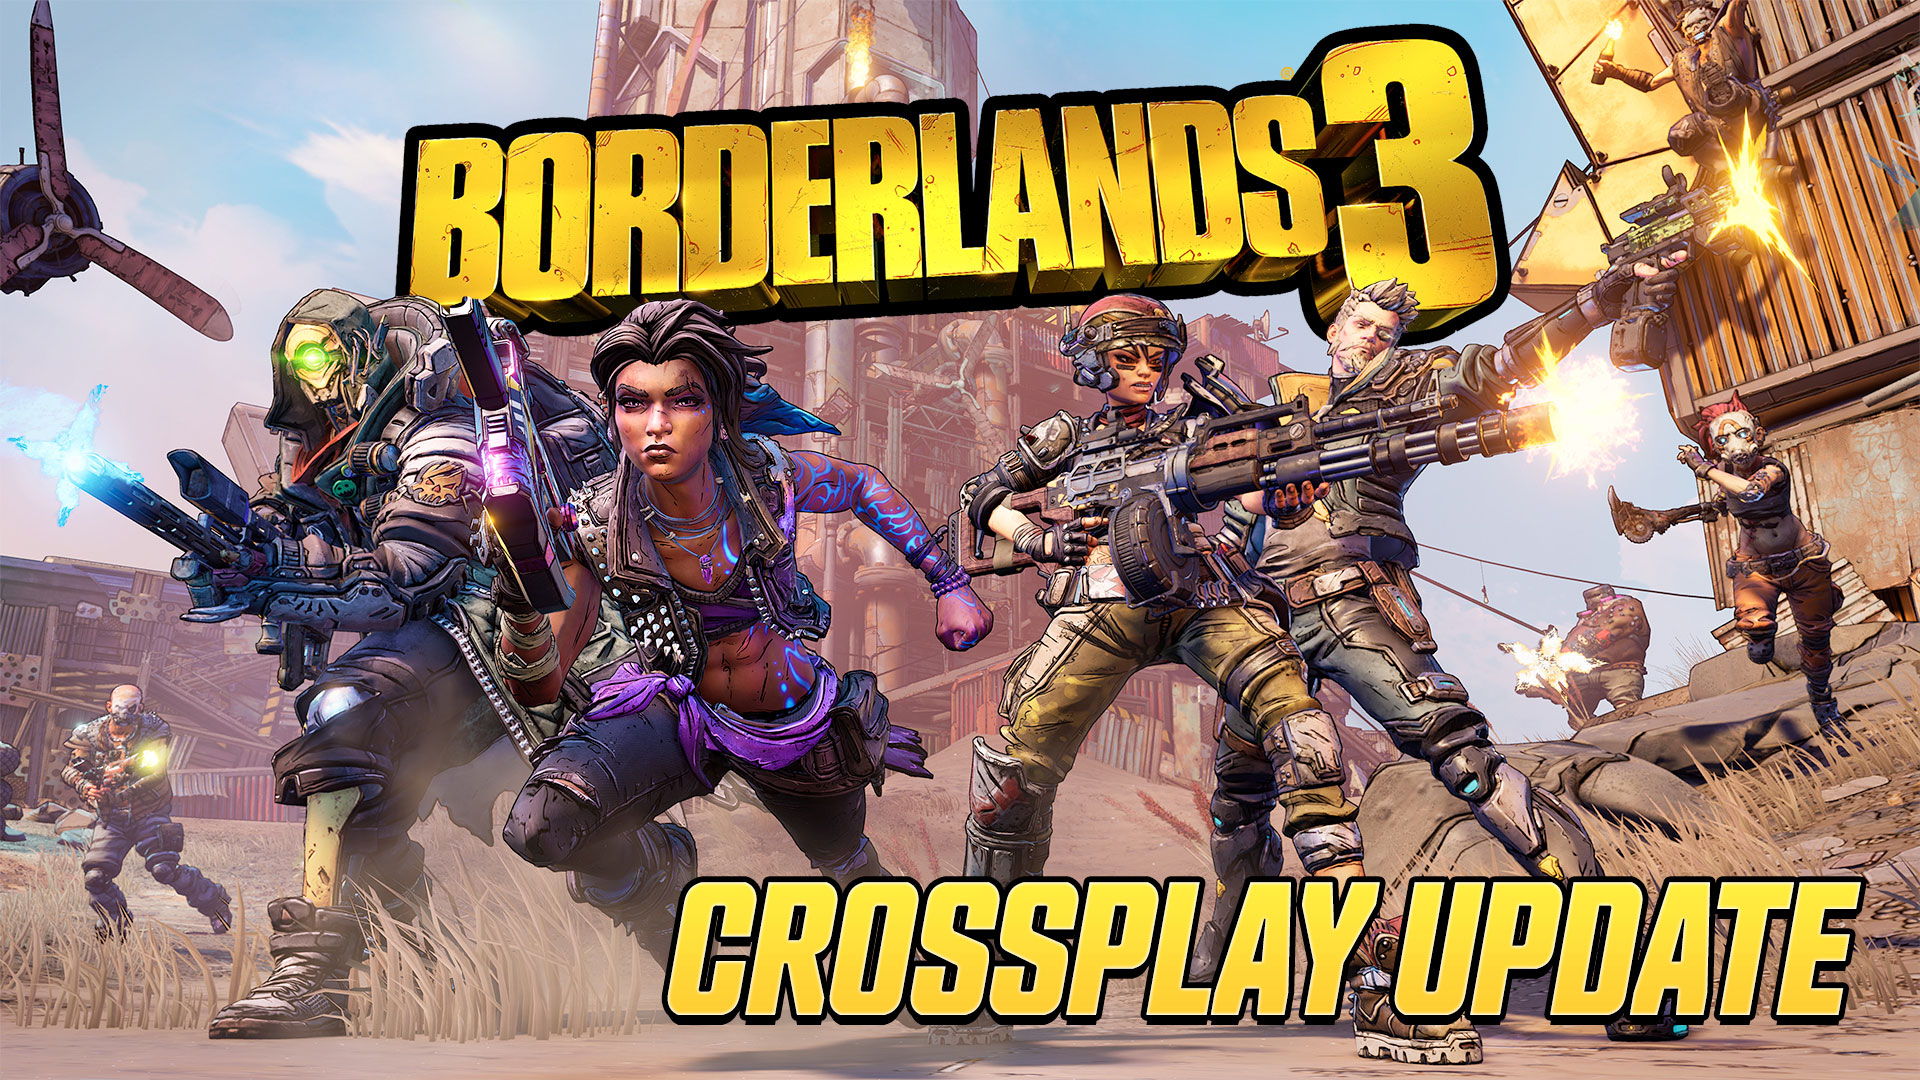 Borderlands 3 cross-play update released with PS4 and PS5 support